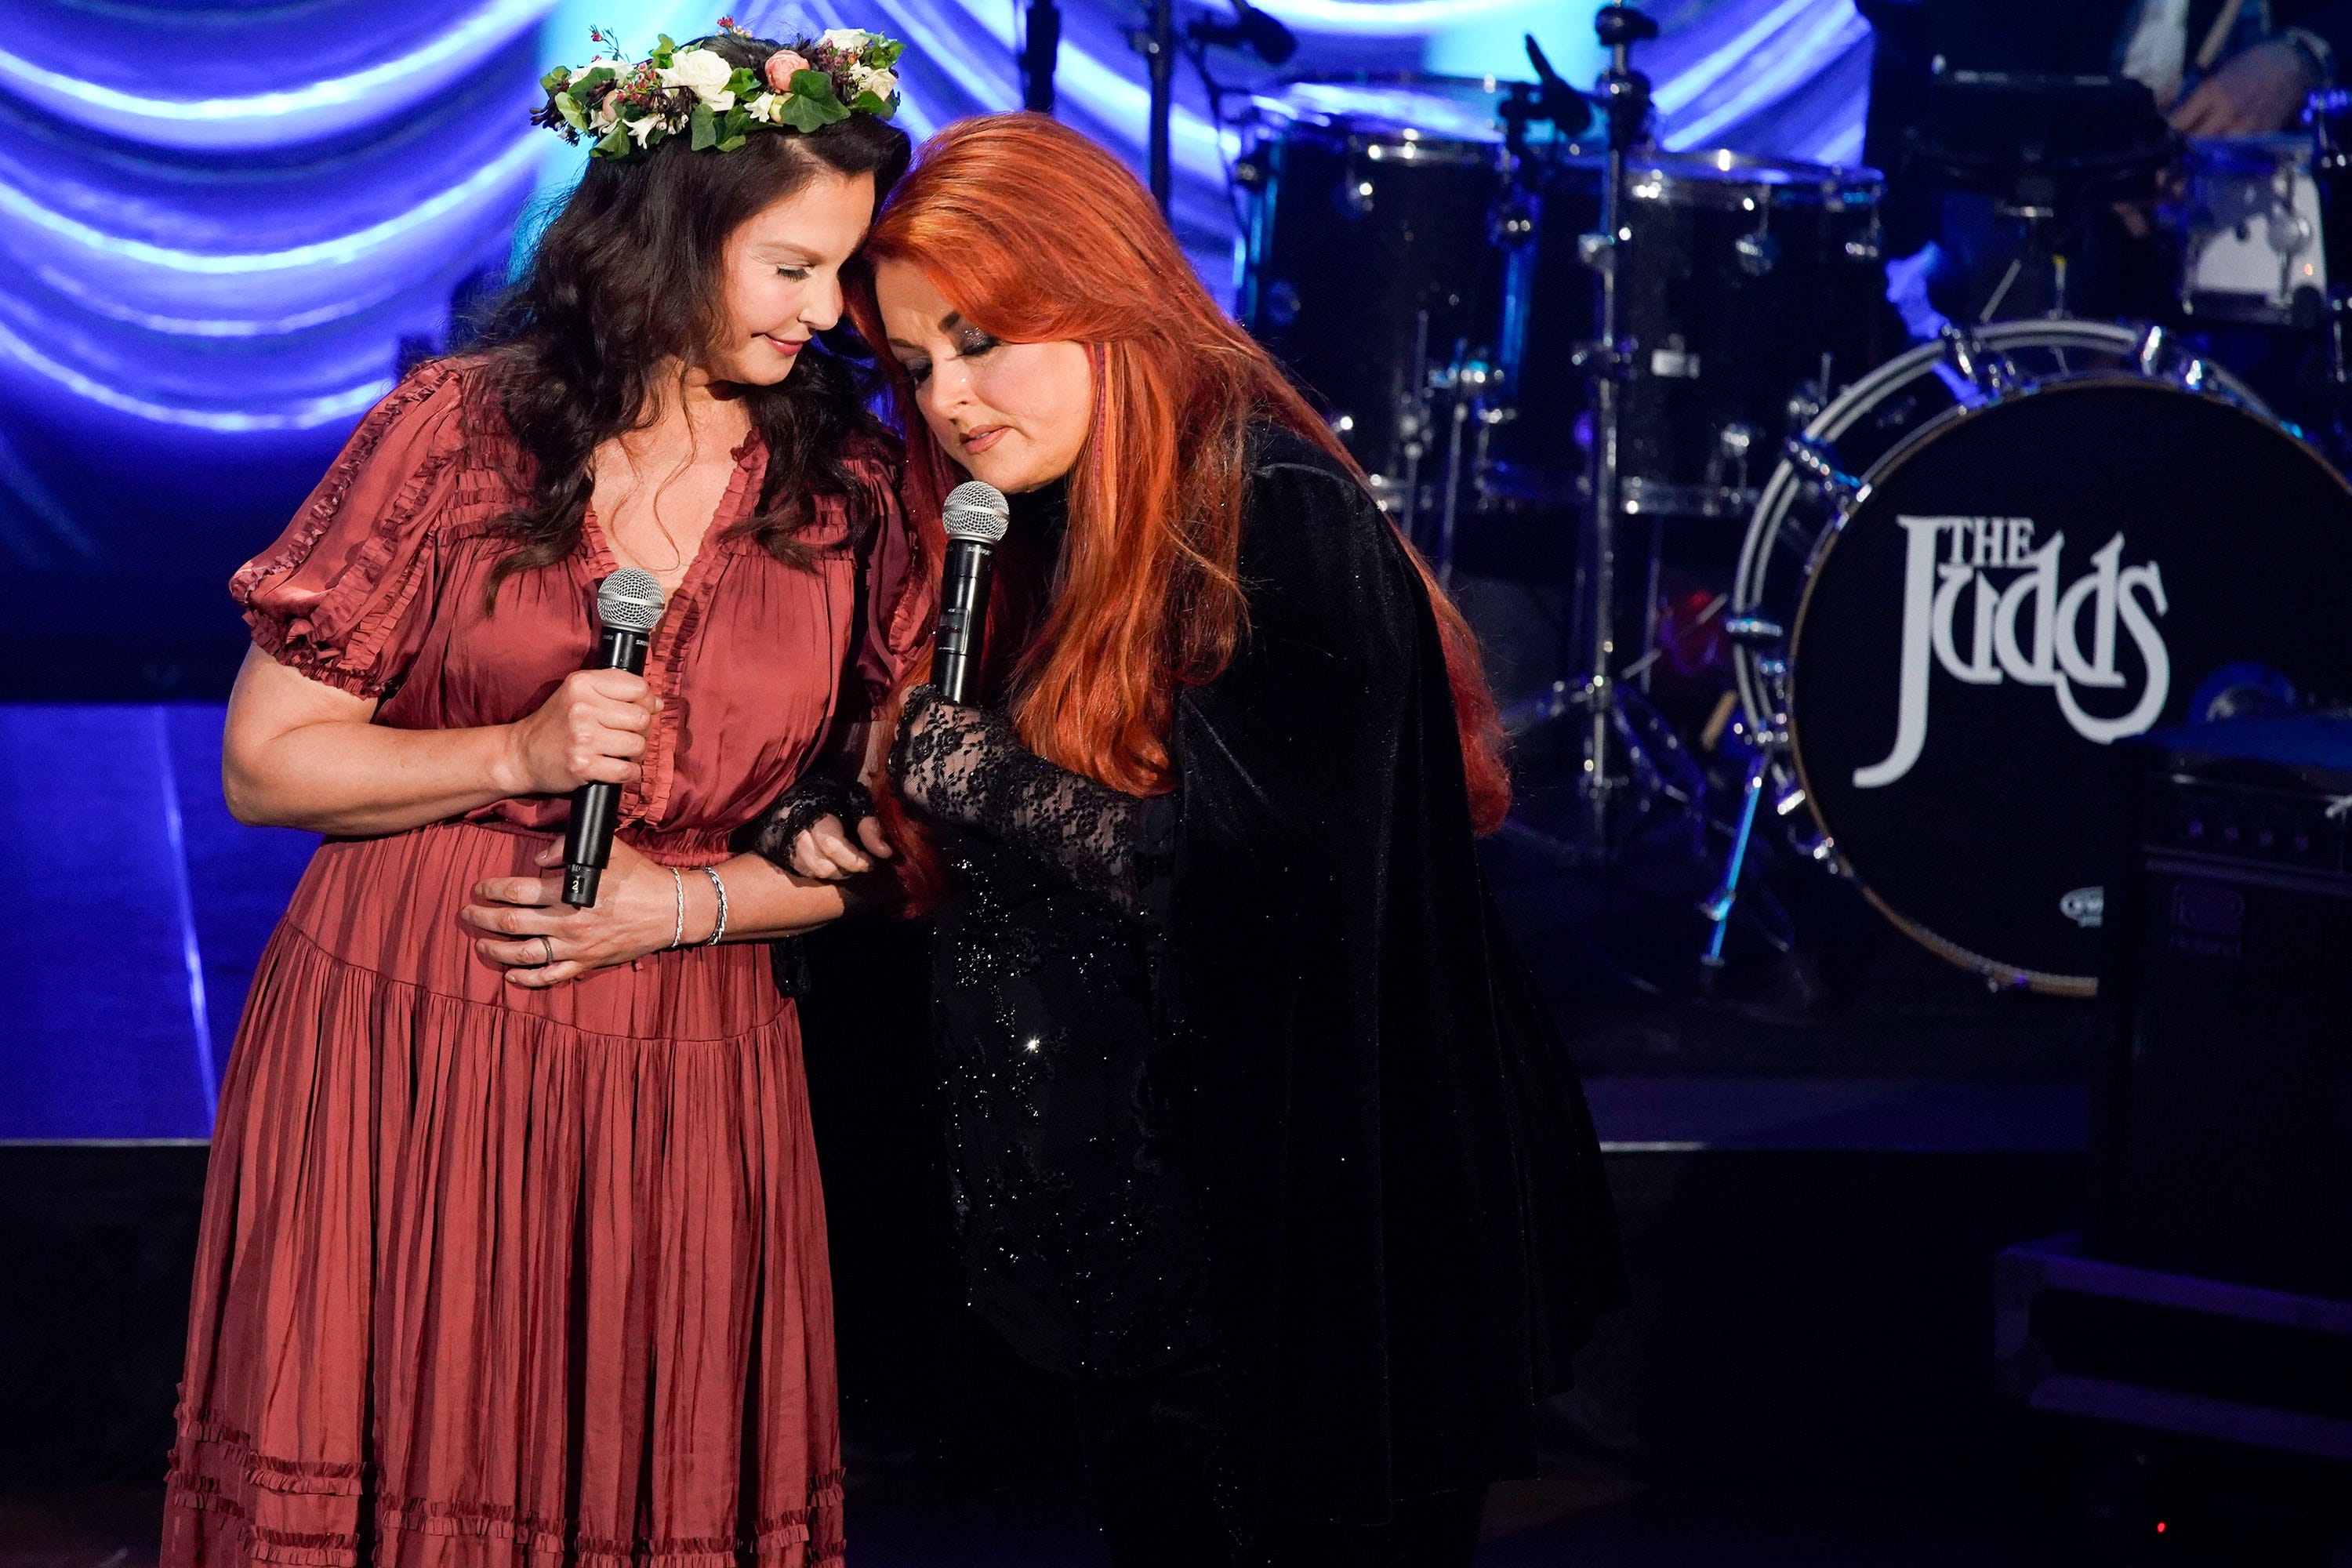 Trisha Yearwood will join Wynonna in Nashville for 'The Judds' concert